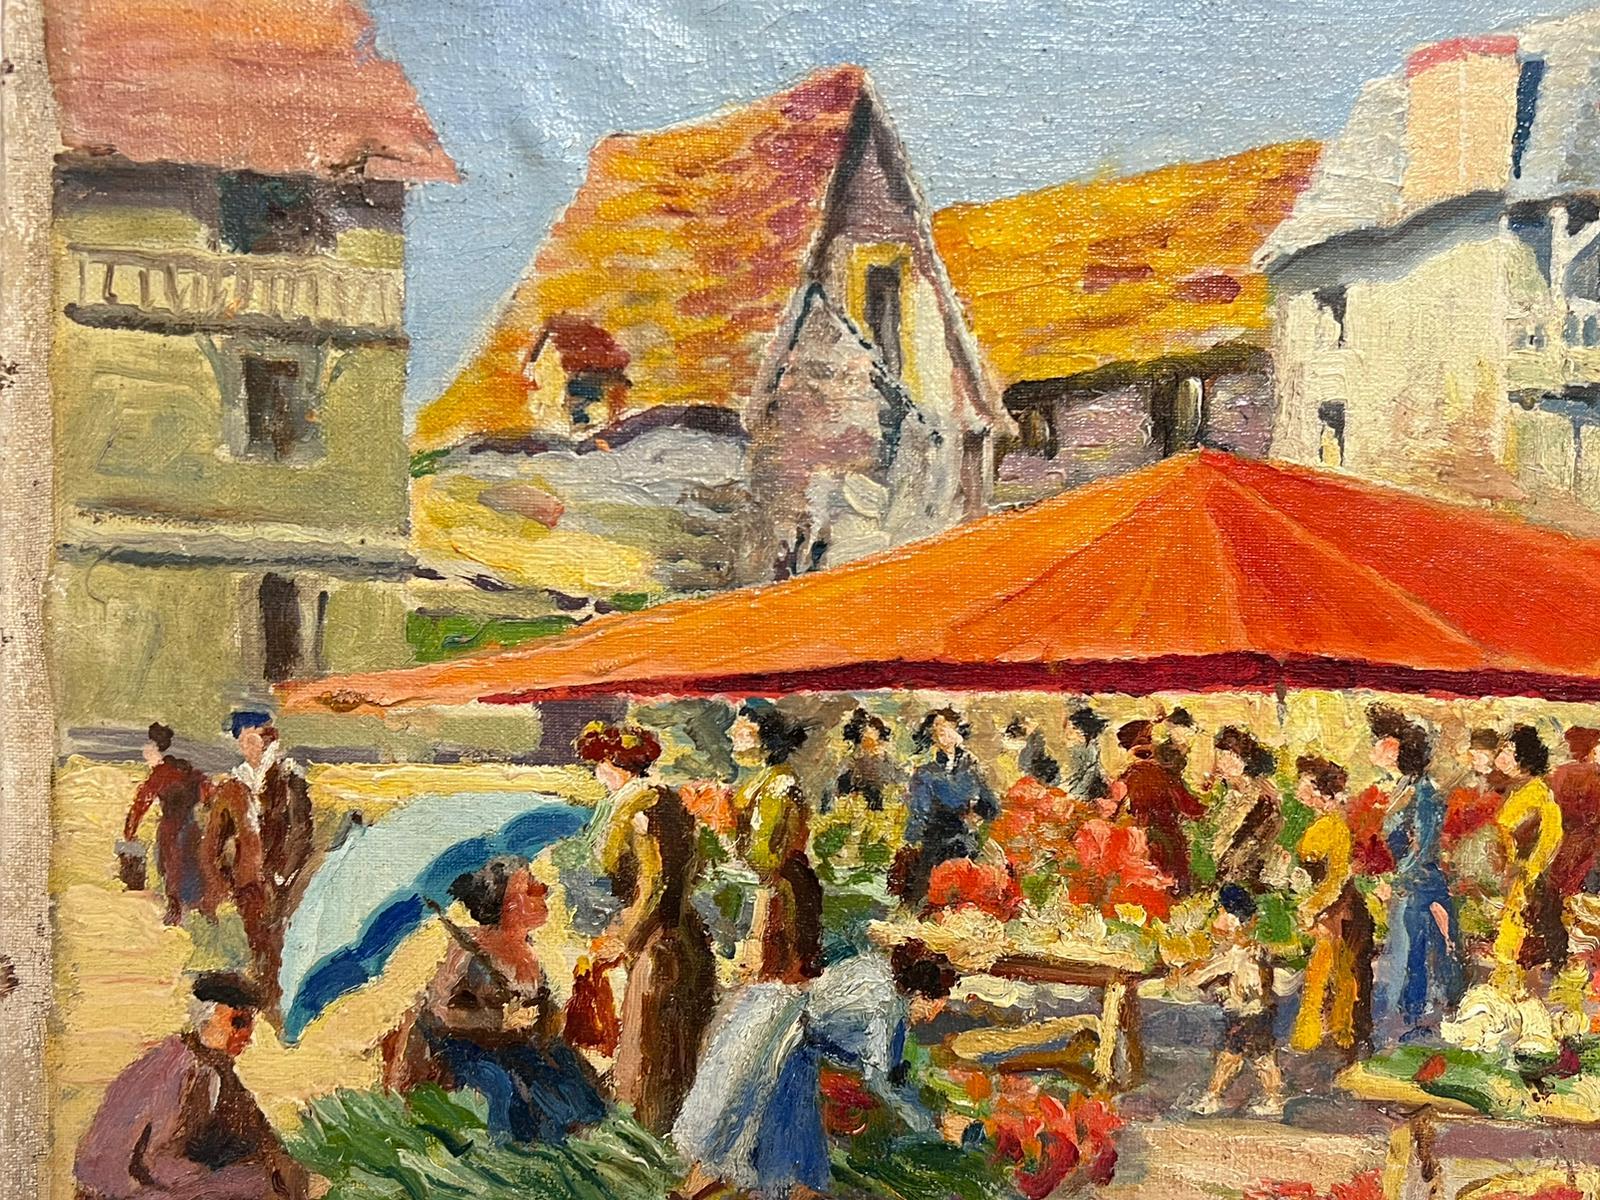 The Fruit & Vegetable Market
French School, circa 1950's
signed and inscribed to the lower corner
oil on canvas, unframed 
canvas: 13 x 18 inches
provenance: private collection, France
condition: very good and sound condition